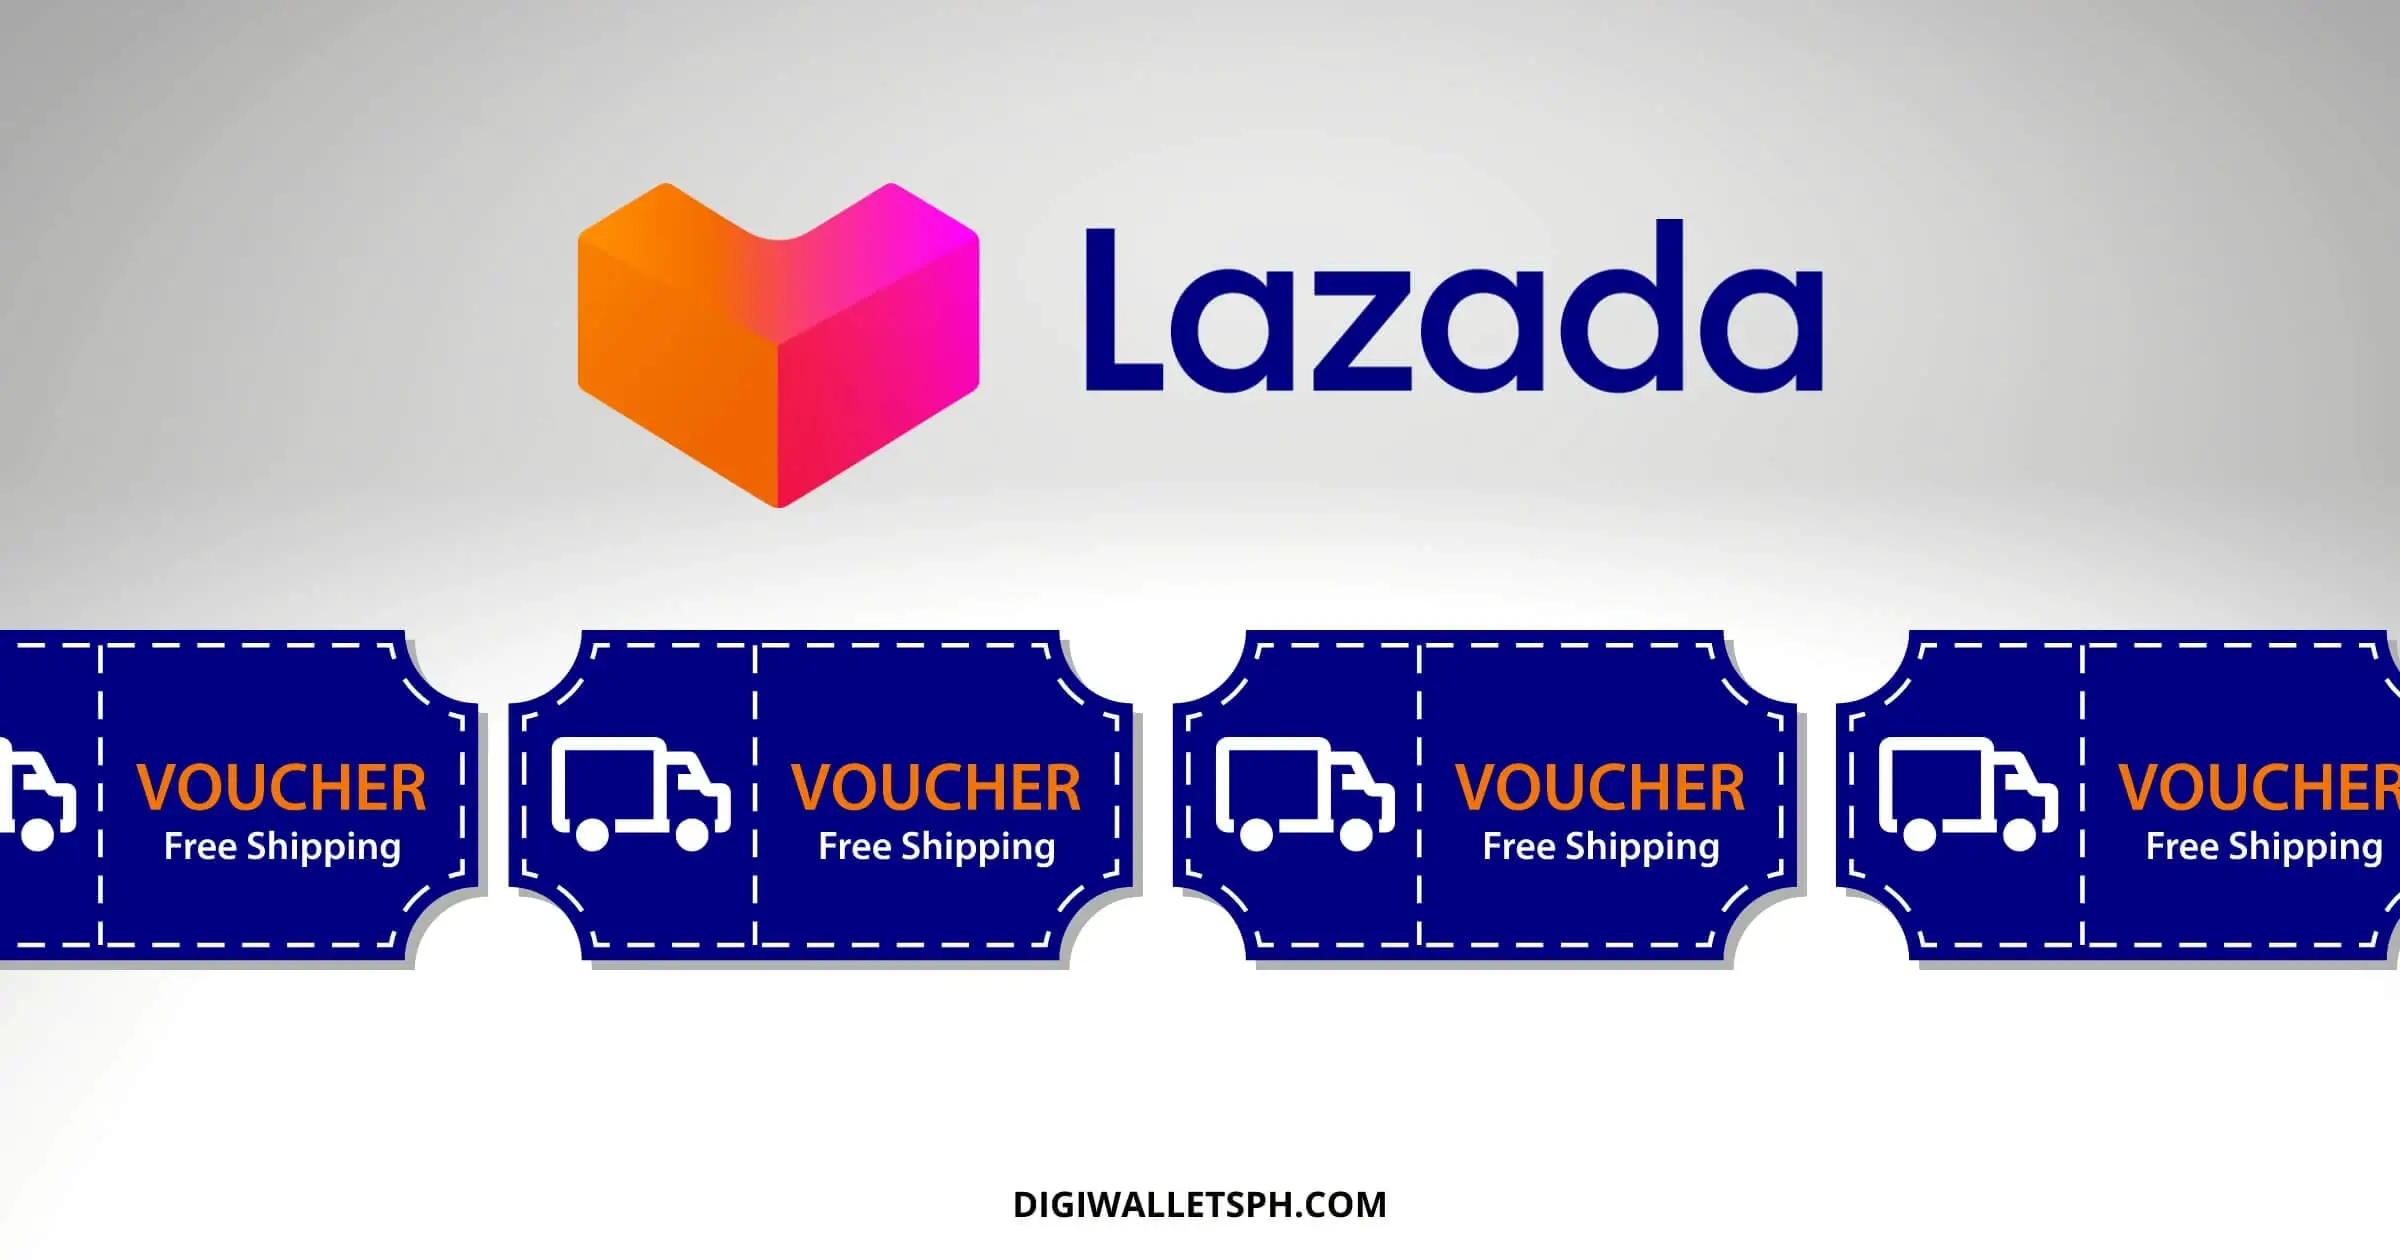 How to use free shipping voucher in Lazada